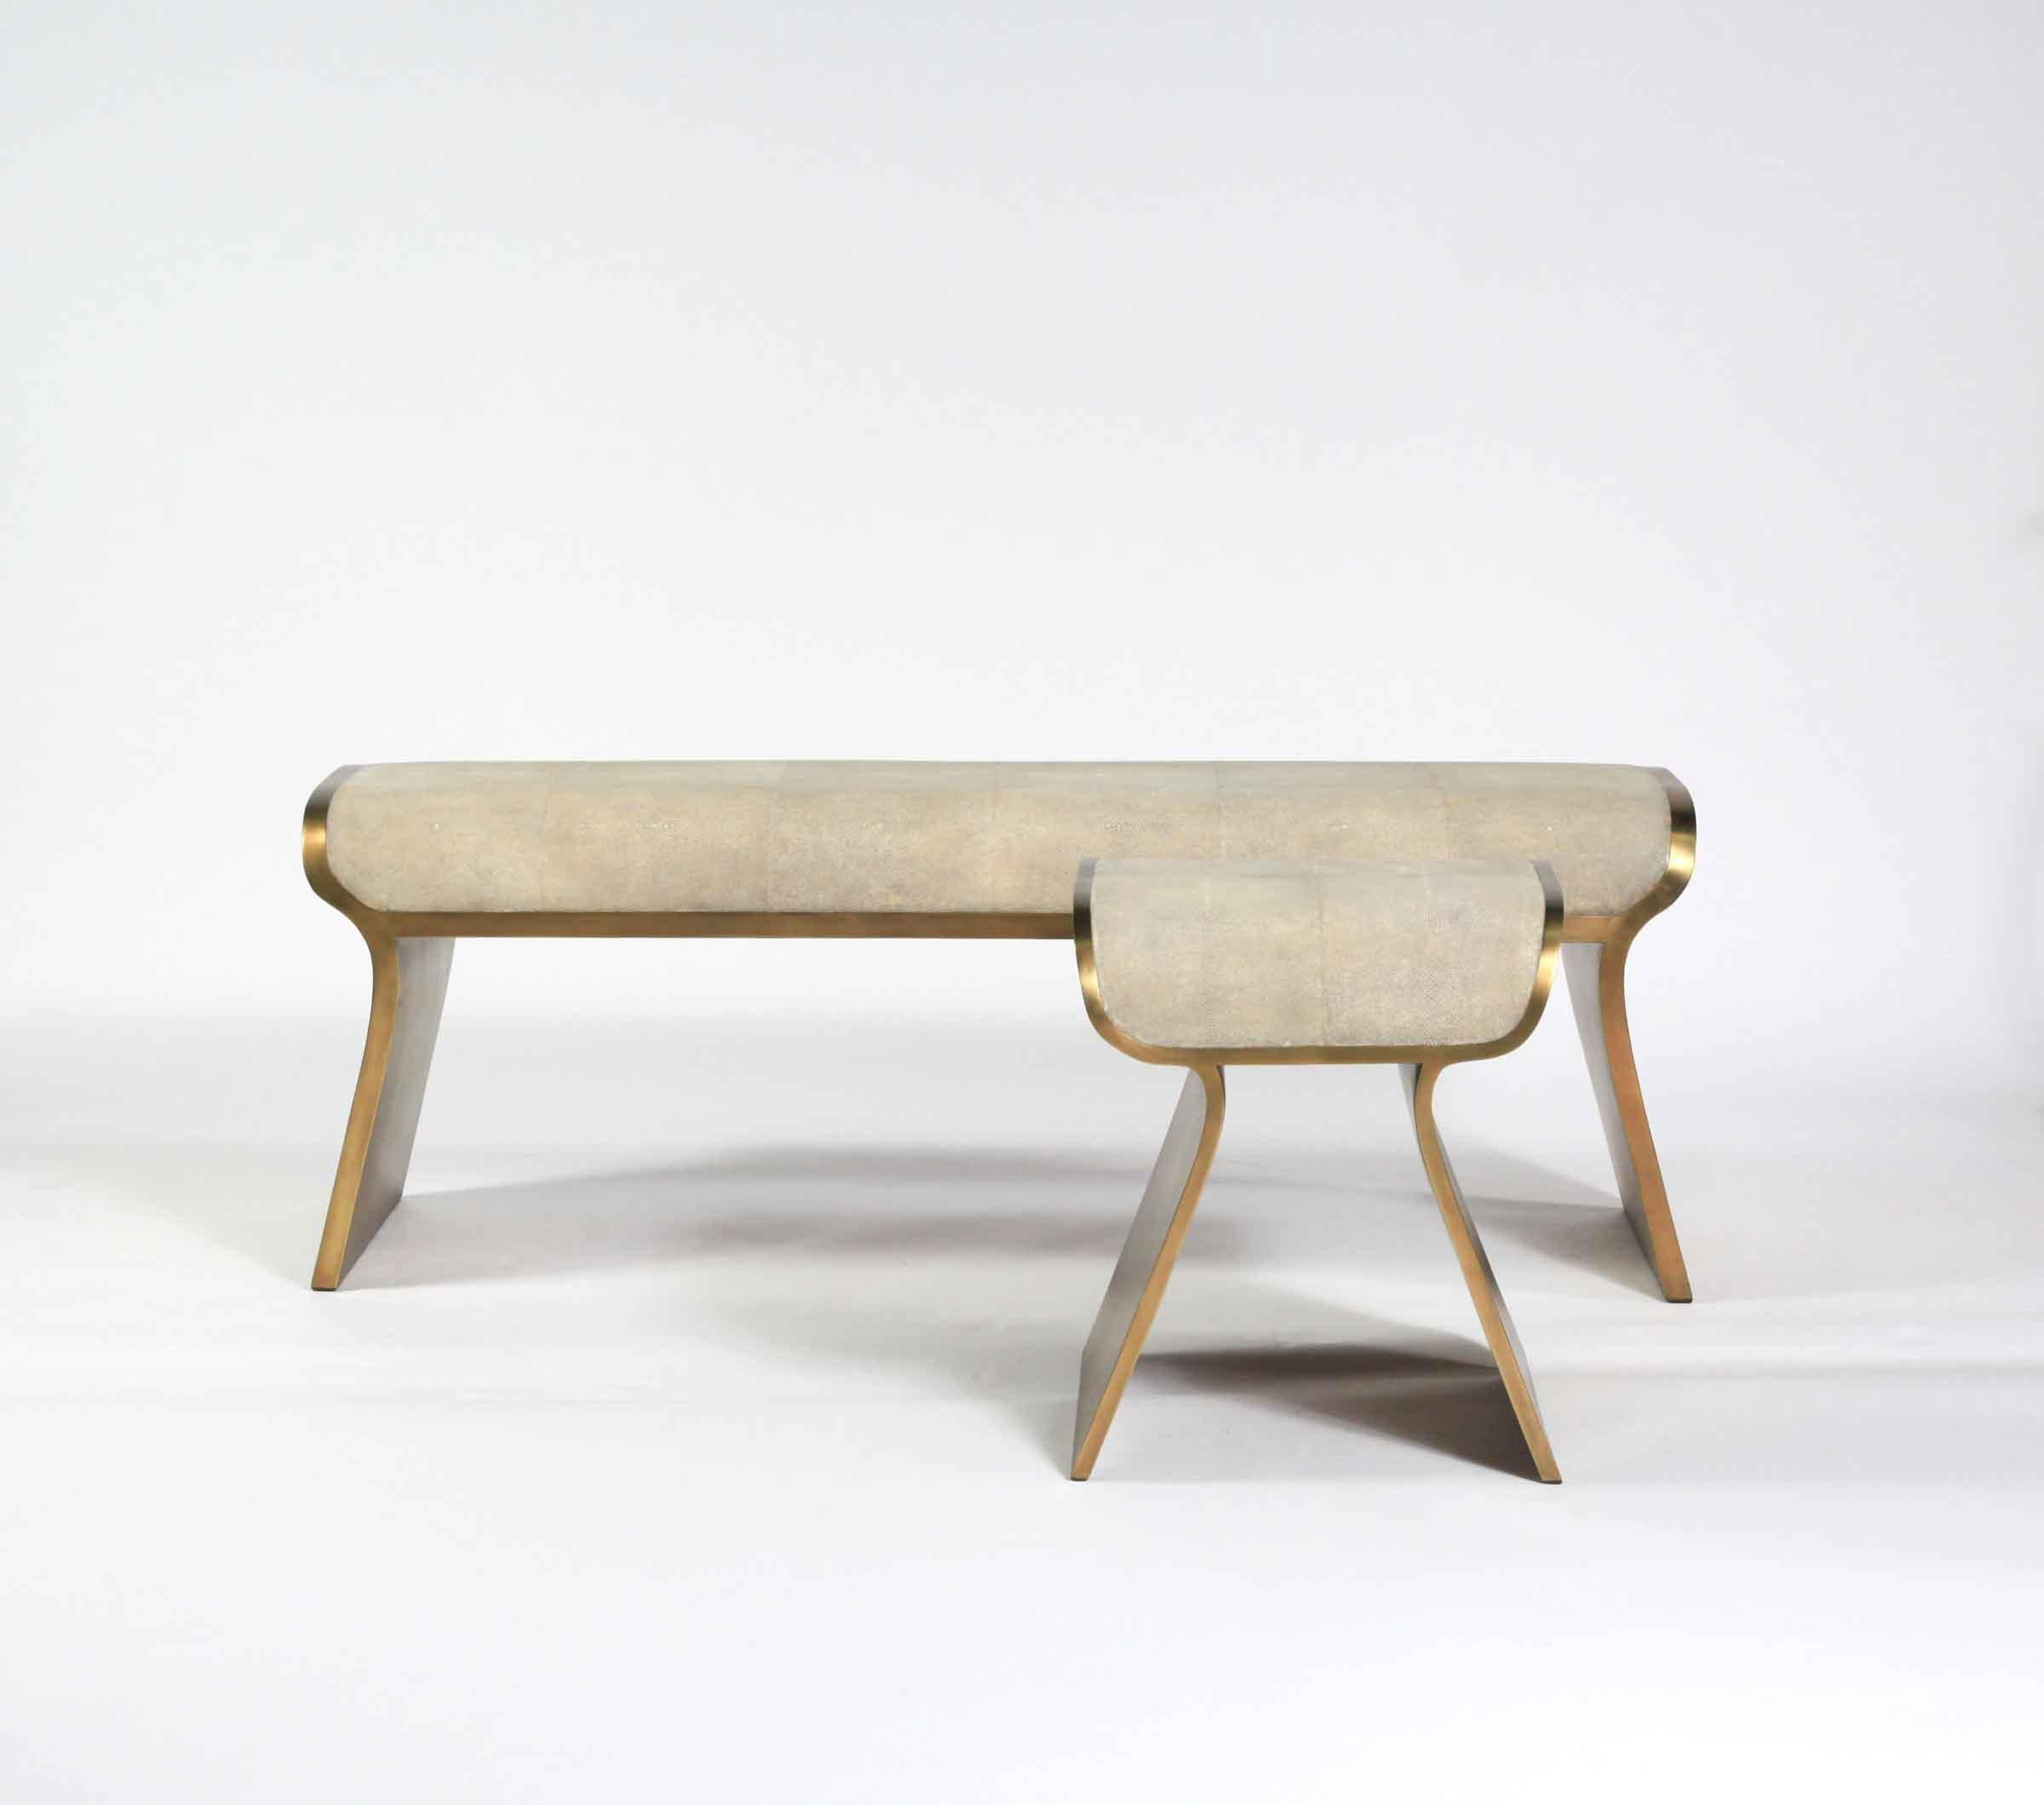 Hand-Crafted Shagreen Bench with Bronze-Patina Brass Details by Kifu Paris